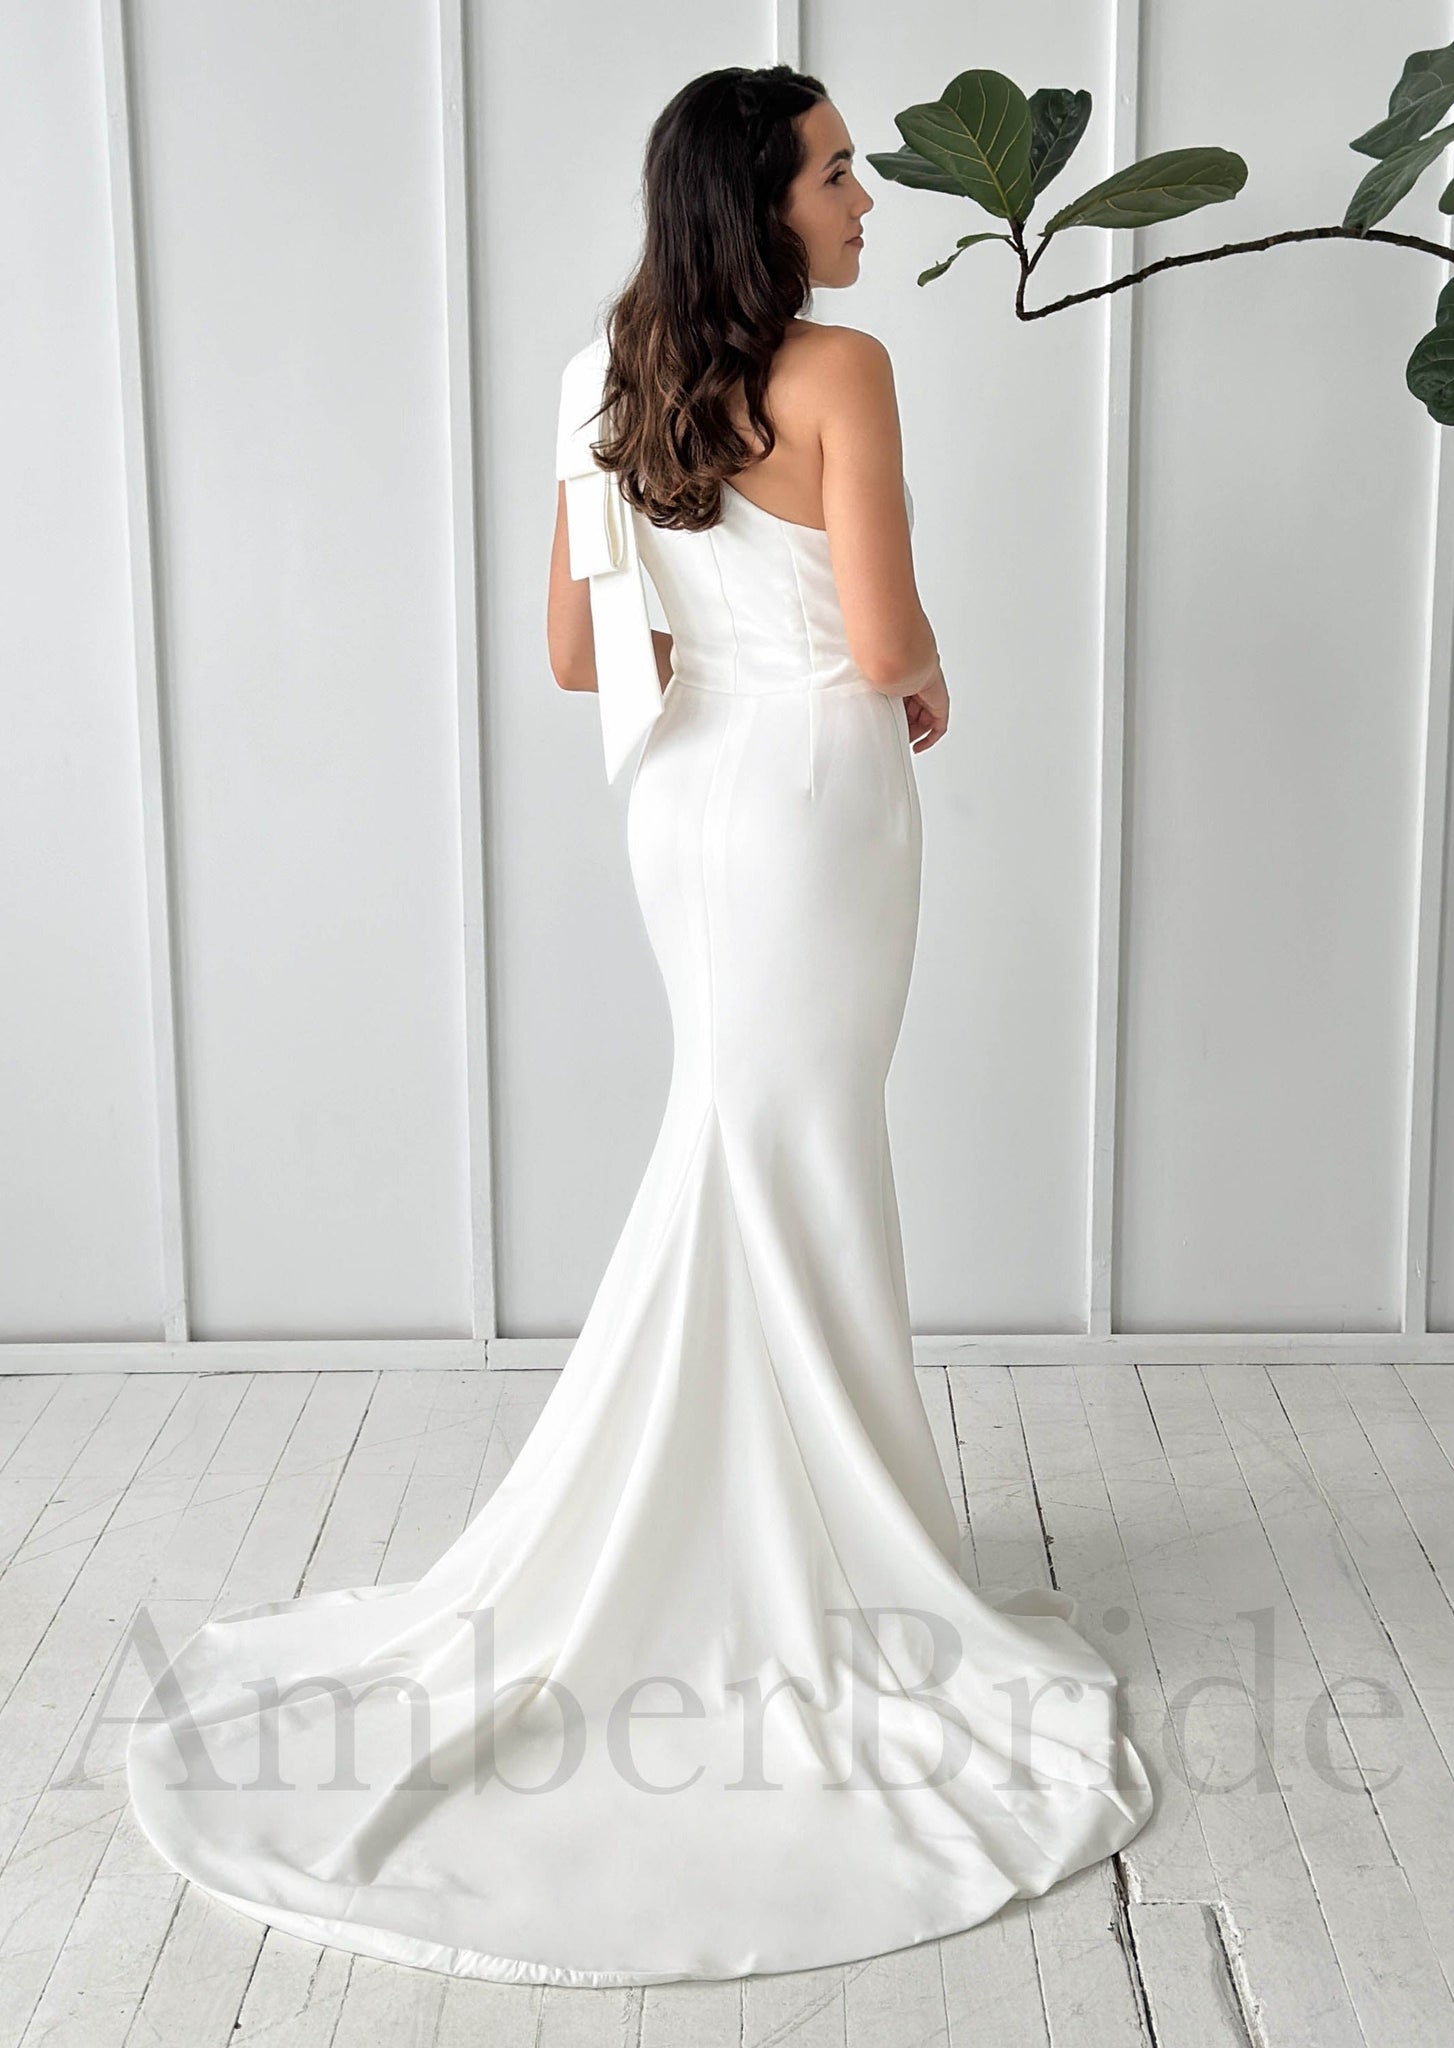 Unique Satin Mermaid Wedding Dress with One Shoulder Bow